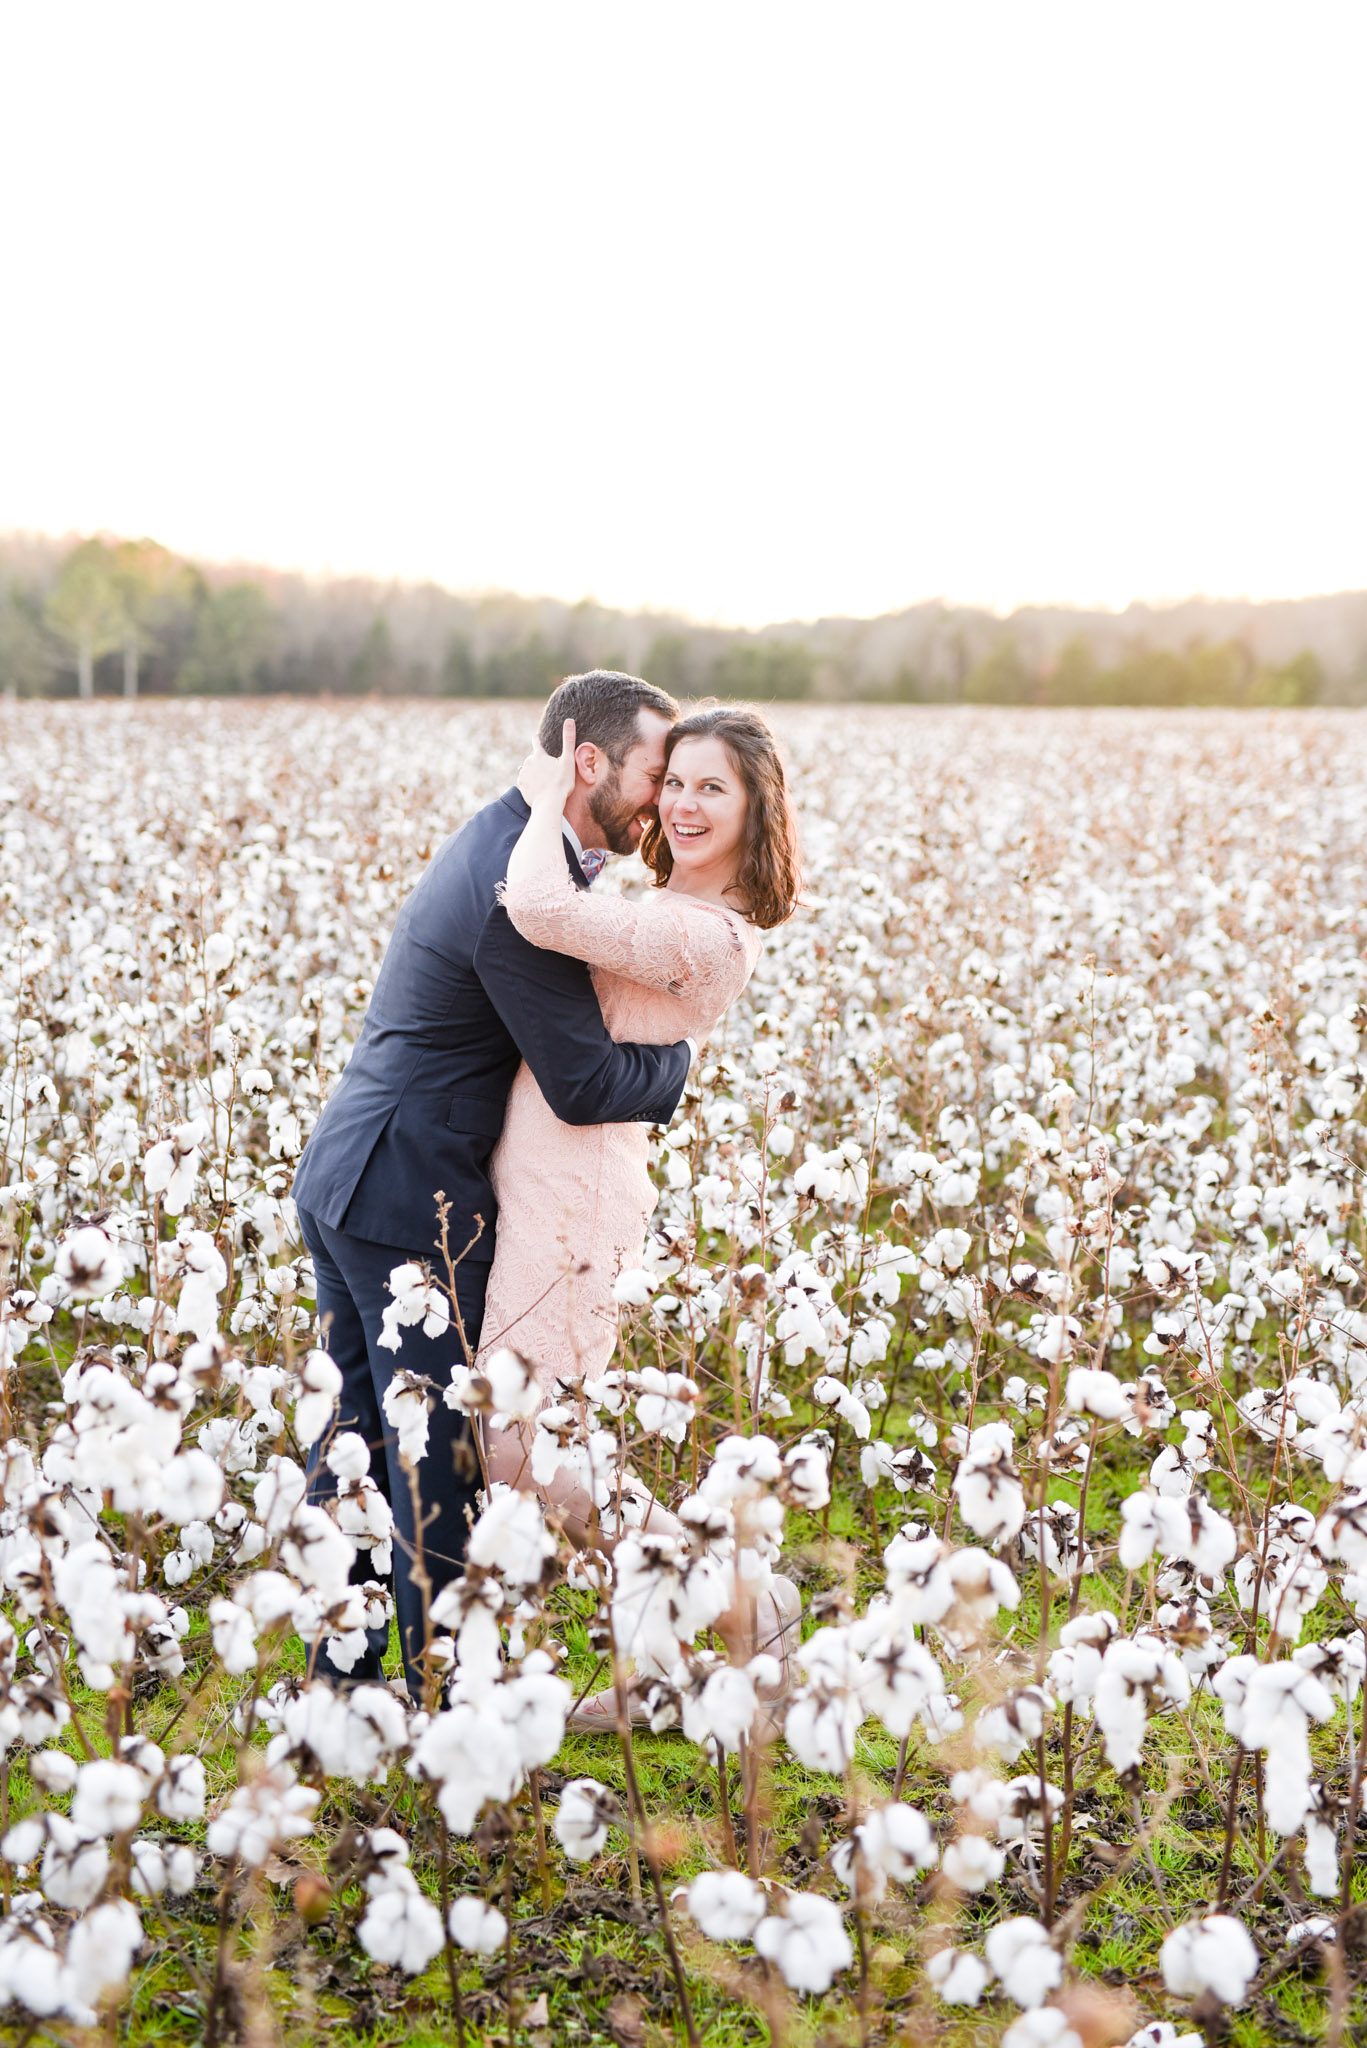 Couple laughs standing in cotton field.